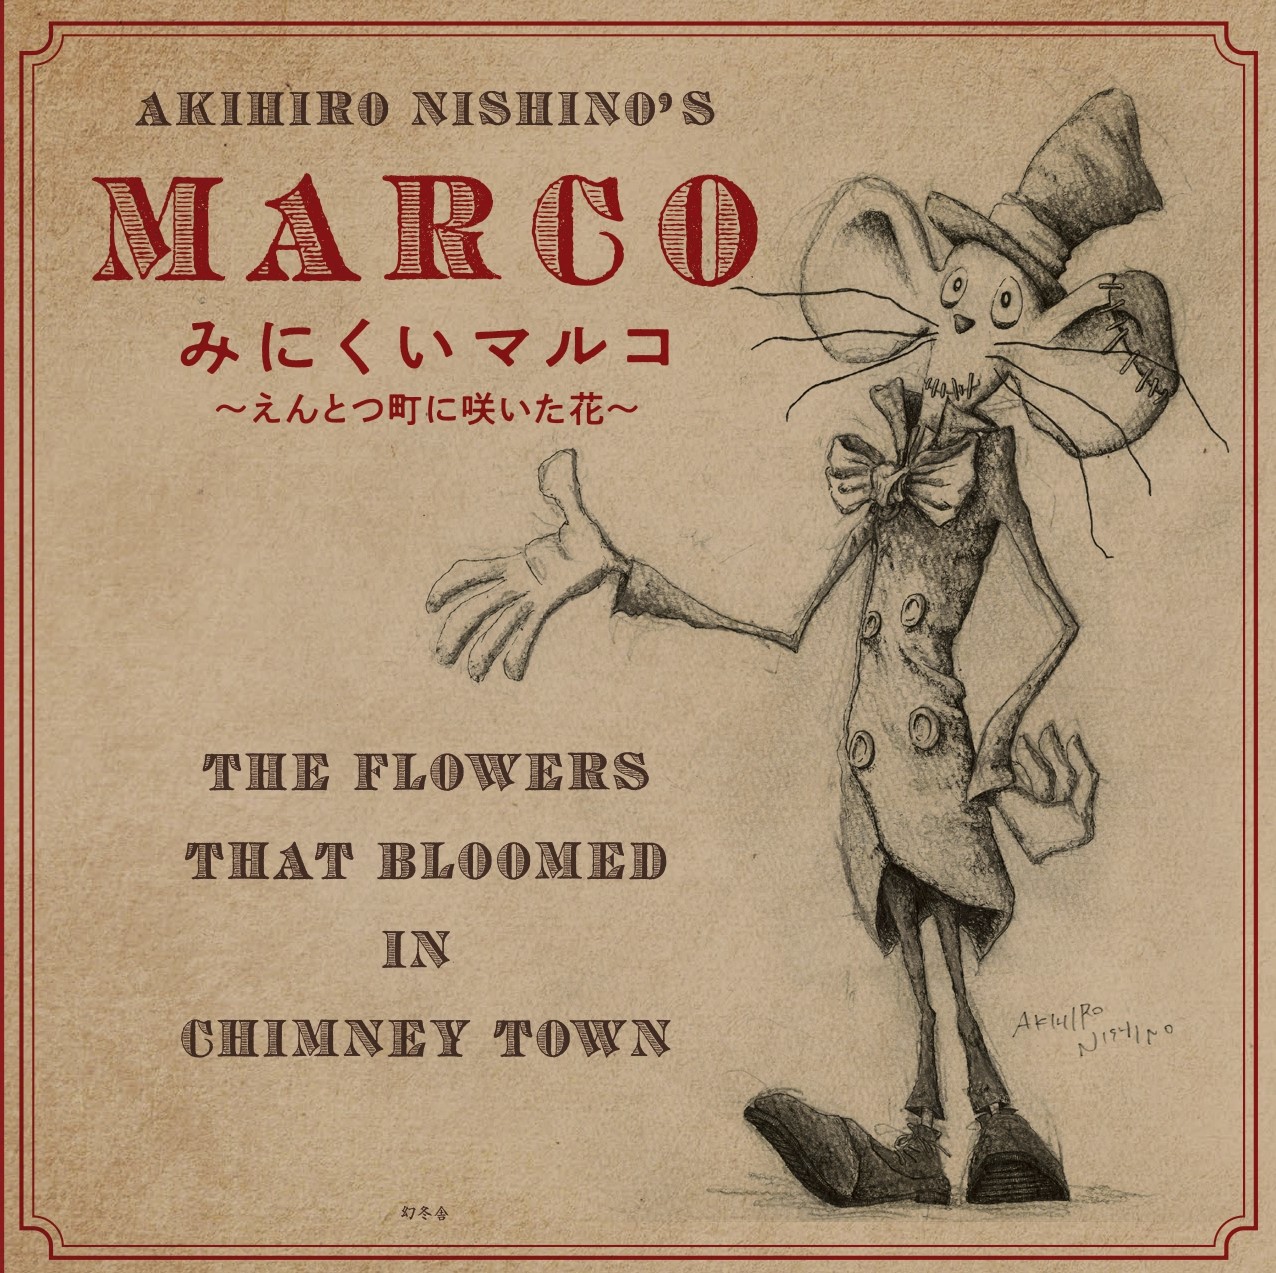 MARCO-CHIMNEY TOWN